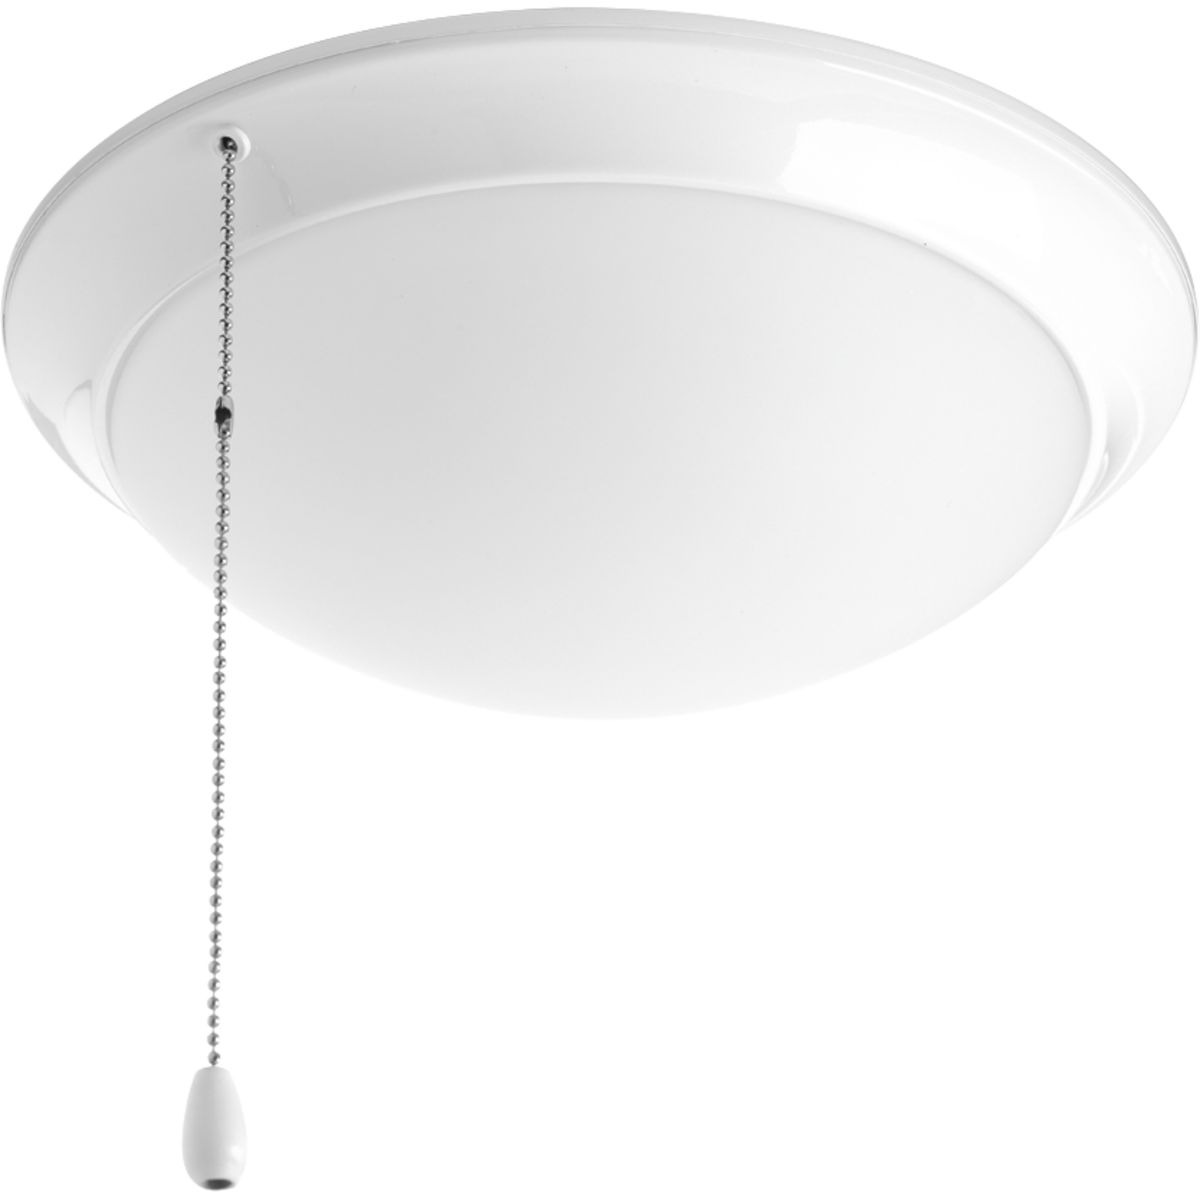 LED universal-style ceiling fan light kit features a low-profile, etched white glass diffuser that's ideal for lighting in a bedroom. 1265 source lumens, 960 lumens delivered. This fan light kit includes a threaded adapter for quick connection to most indoor ceiling fans that accept an accessory light. Pull chain is Chrome with a white fob.